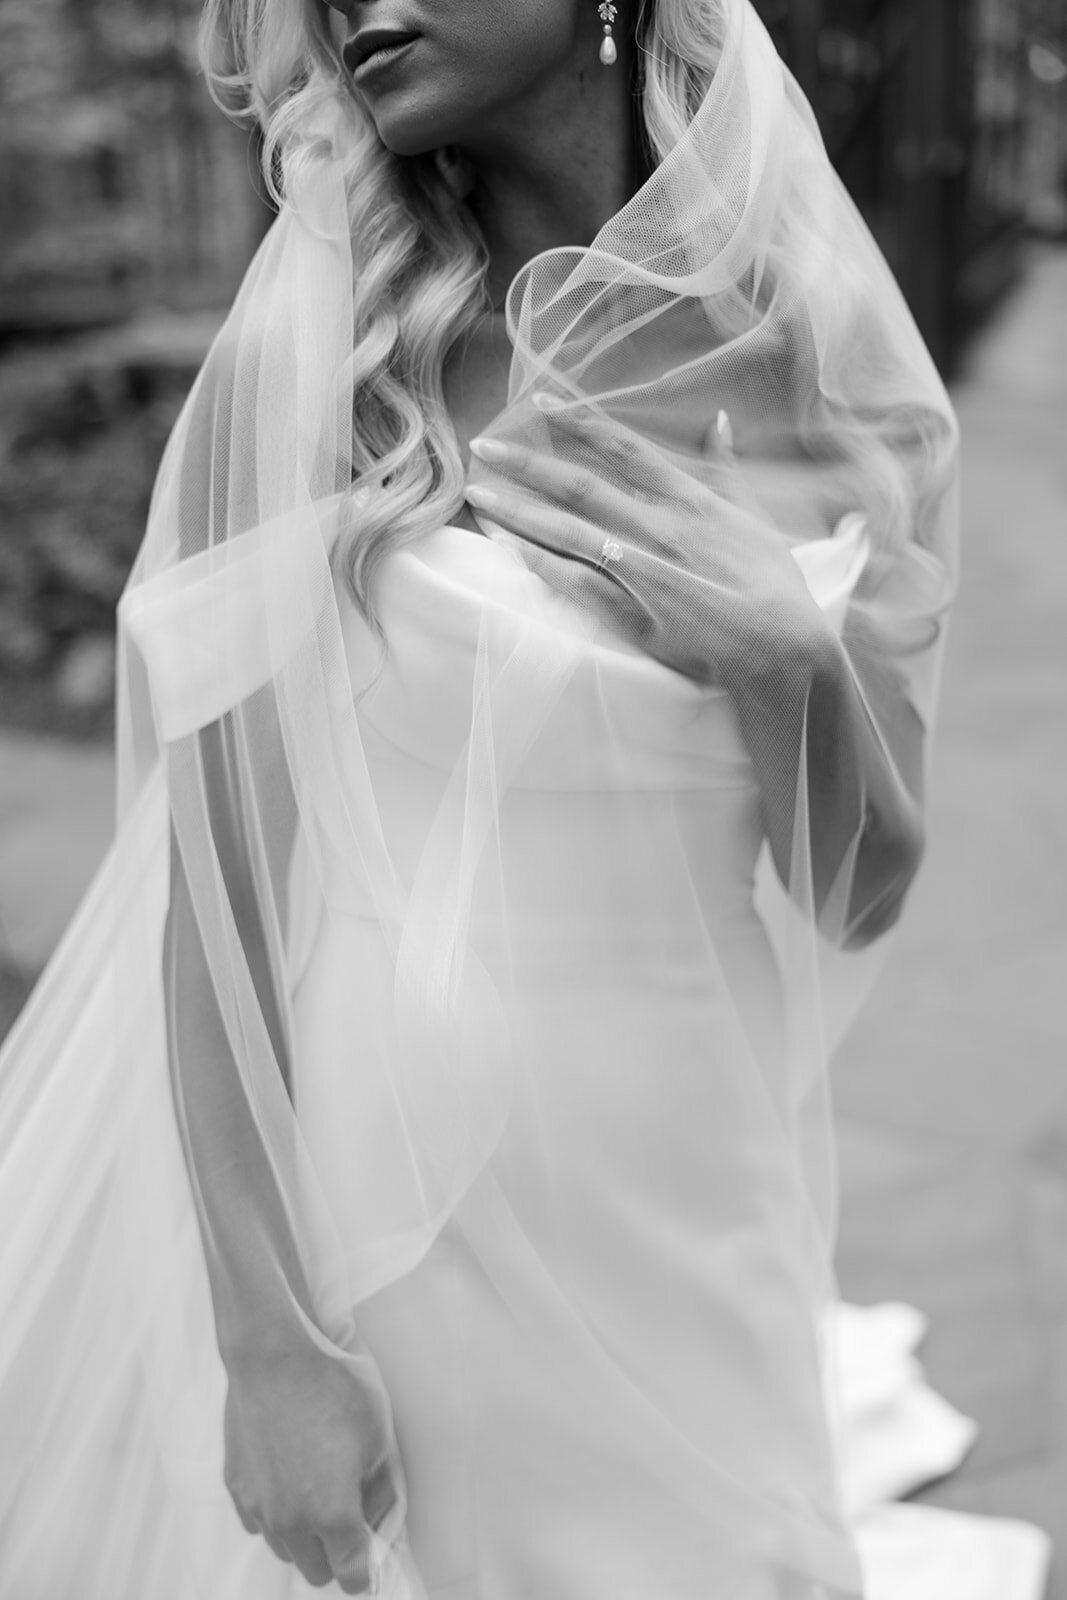 Bride wrapped in her veil showing off her wedding ring looking to the side.